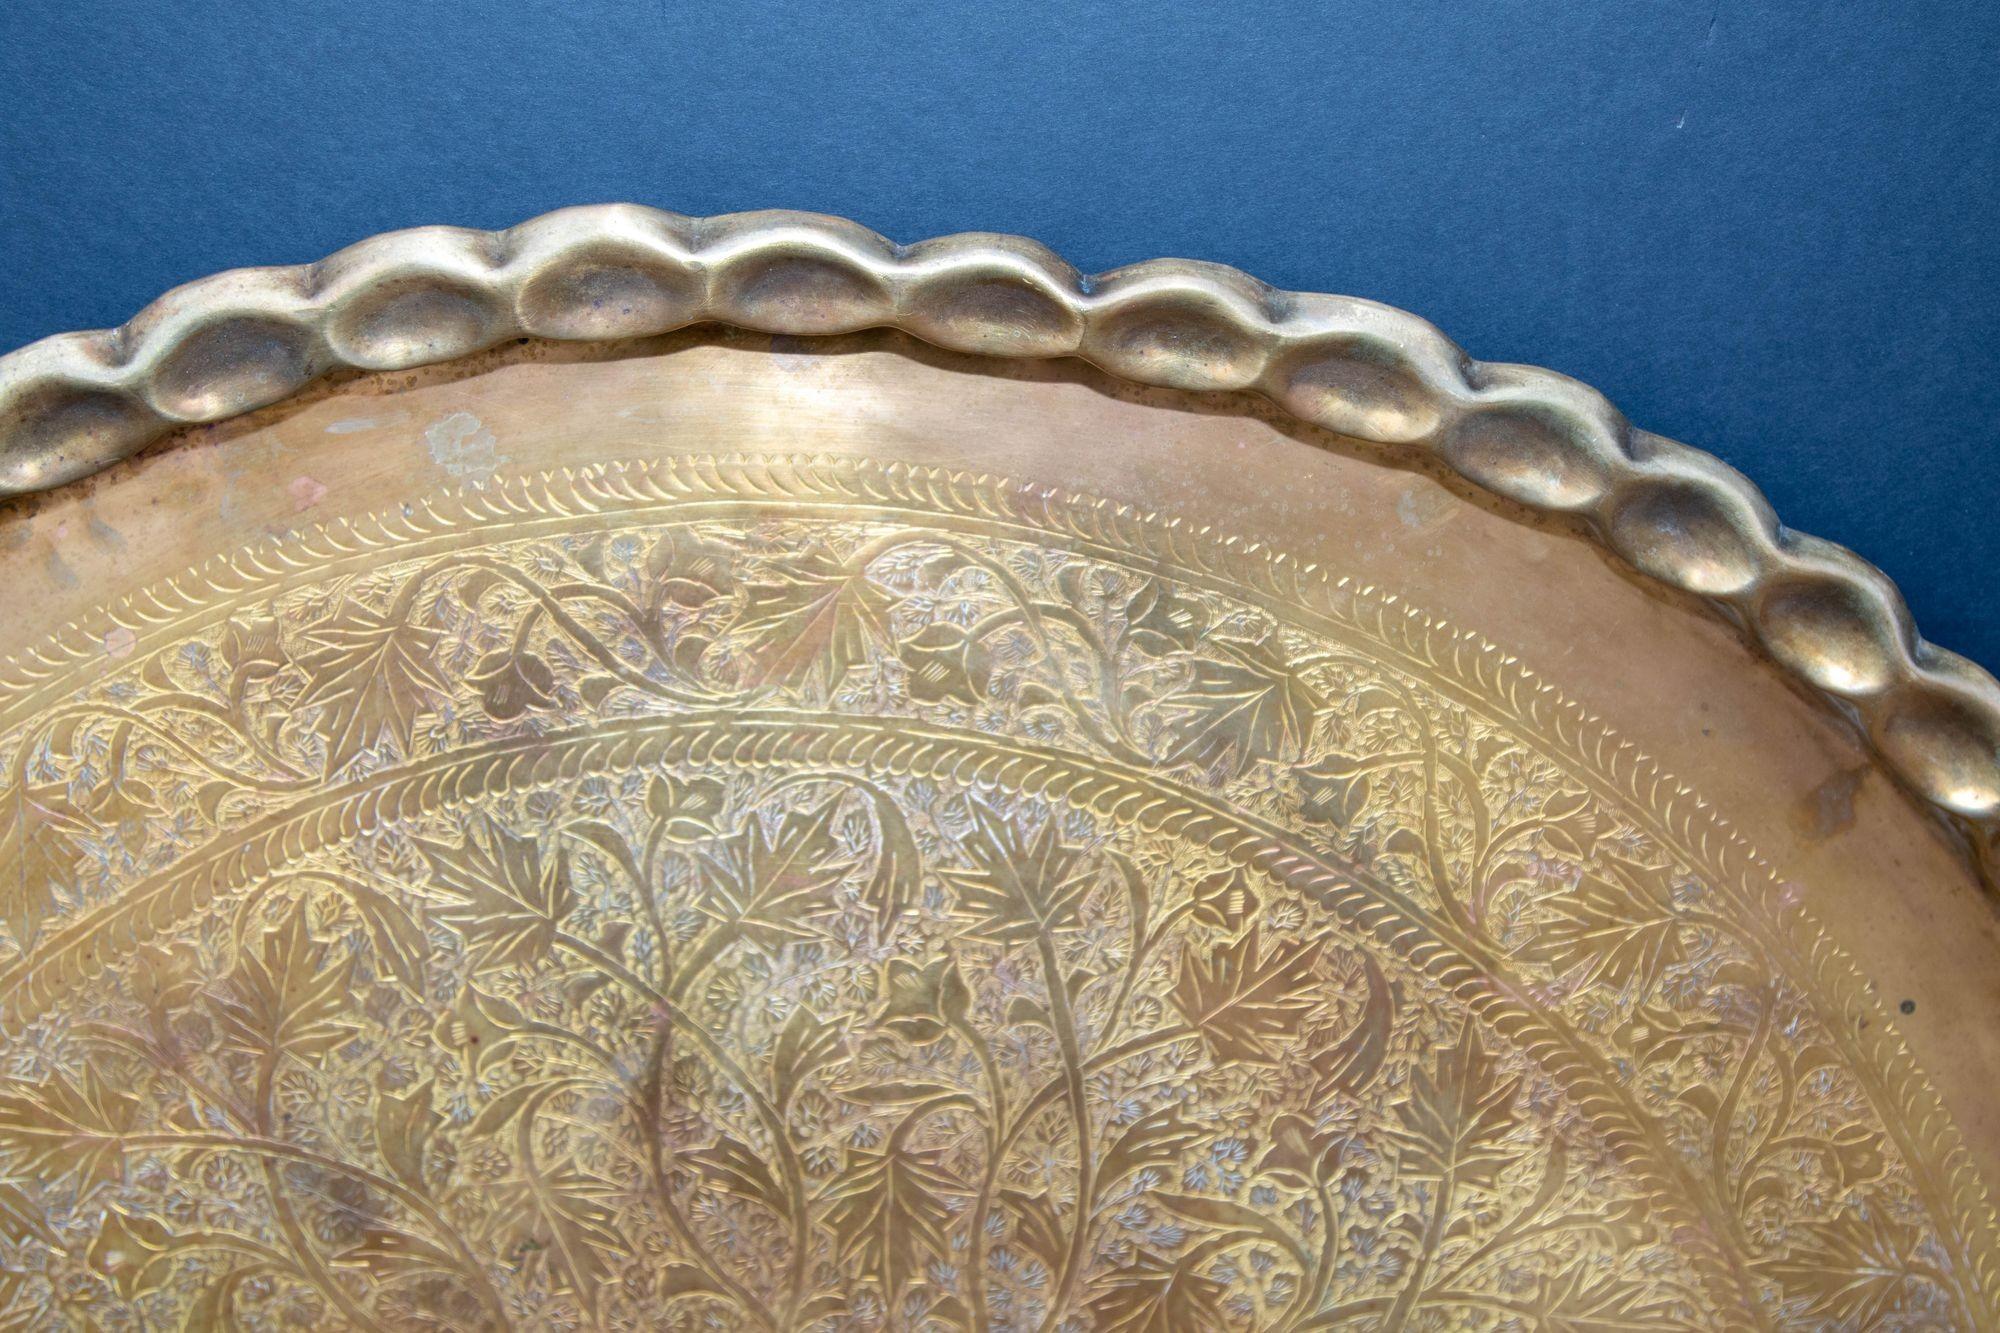 Asian Mughal Rajasthani Large Polished Round Brass Tray with Crest Edges 37 in D 11